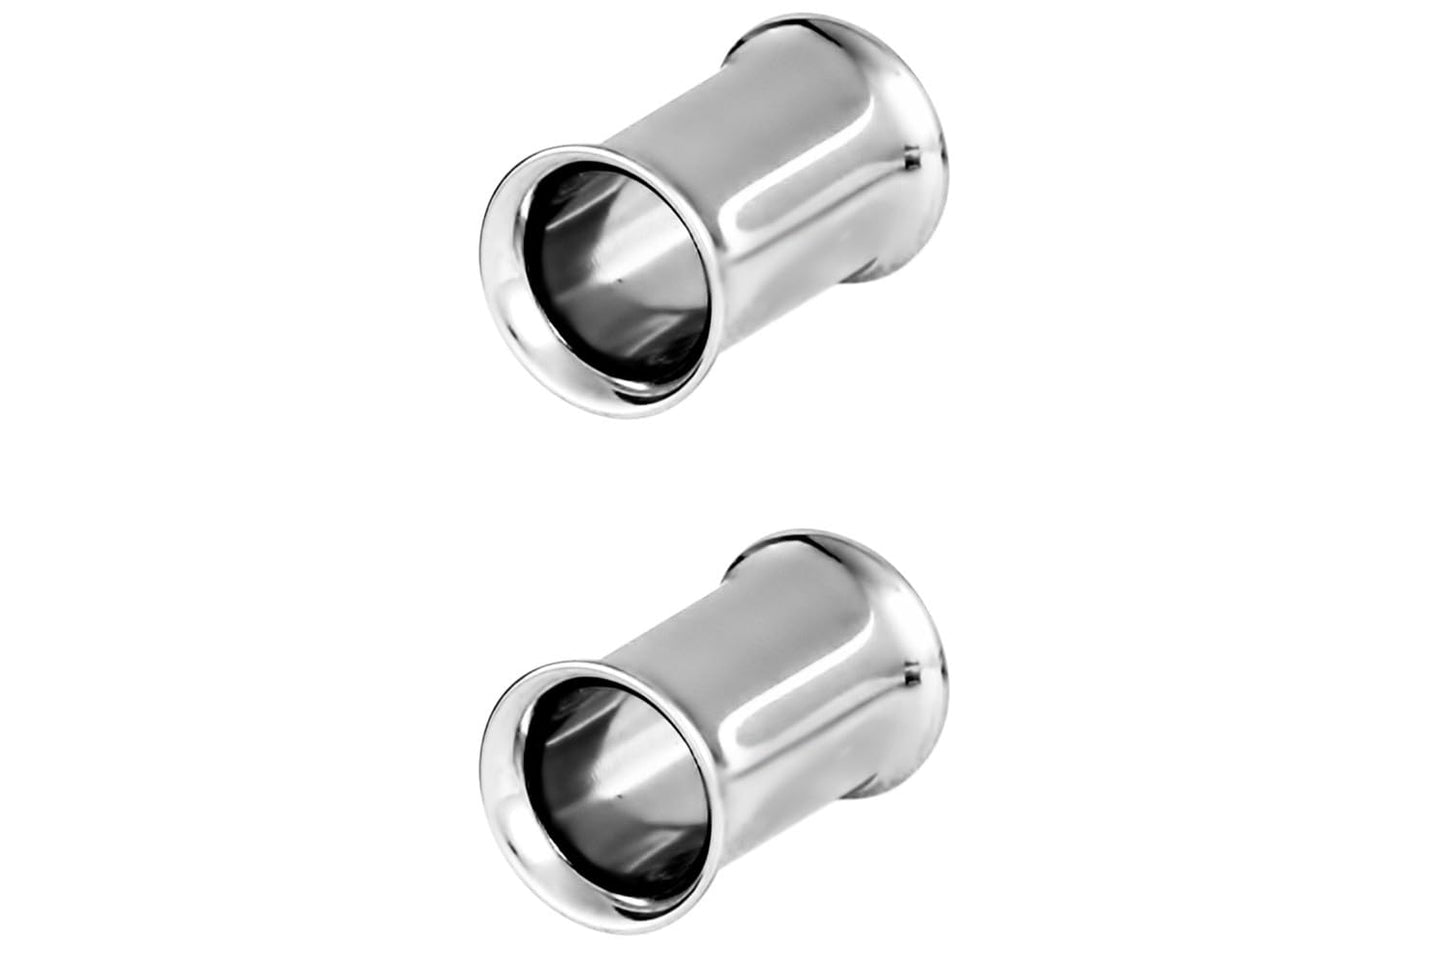 Forbidden Body Jewelry Surgical Steel Ear Gauges, Double Flared Saddle Tunnel Plug Earrings, 5mm - 10mm